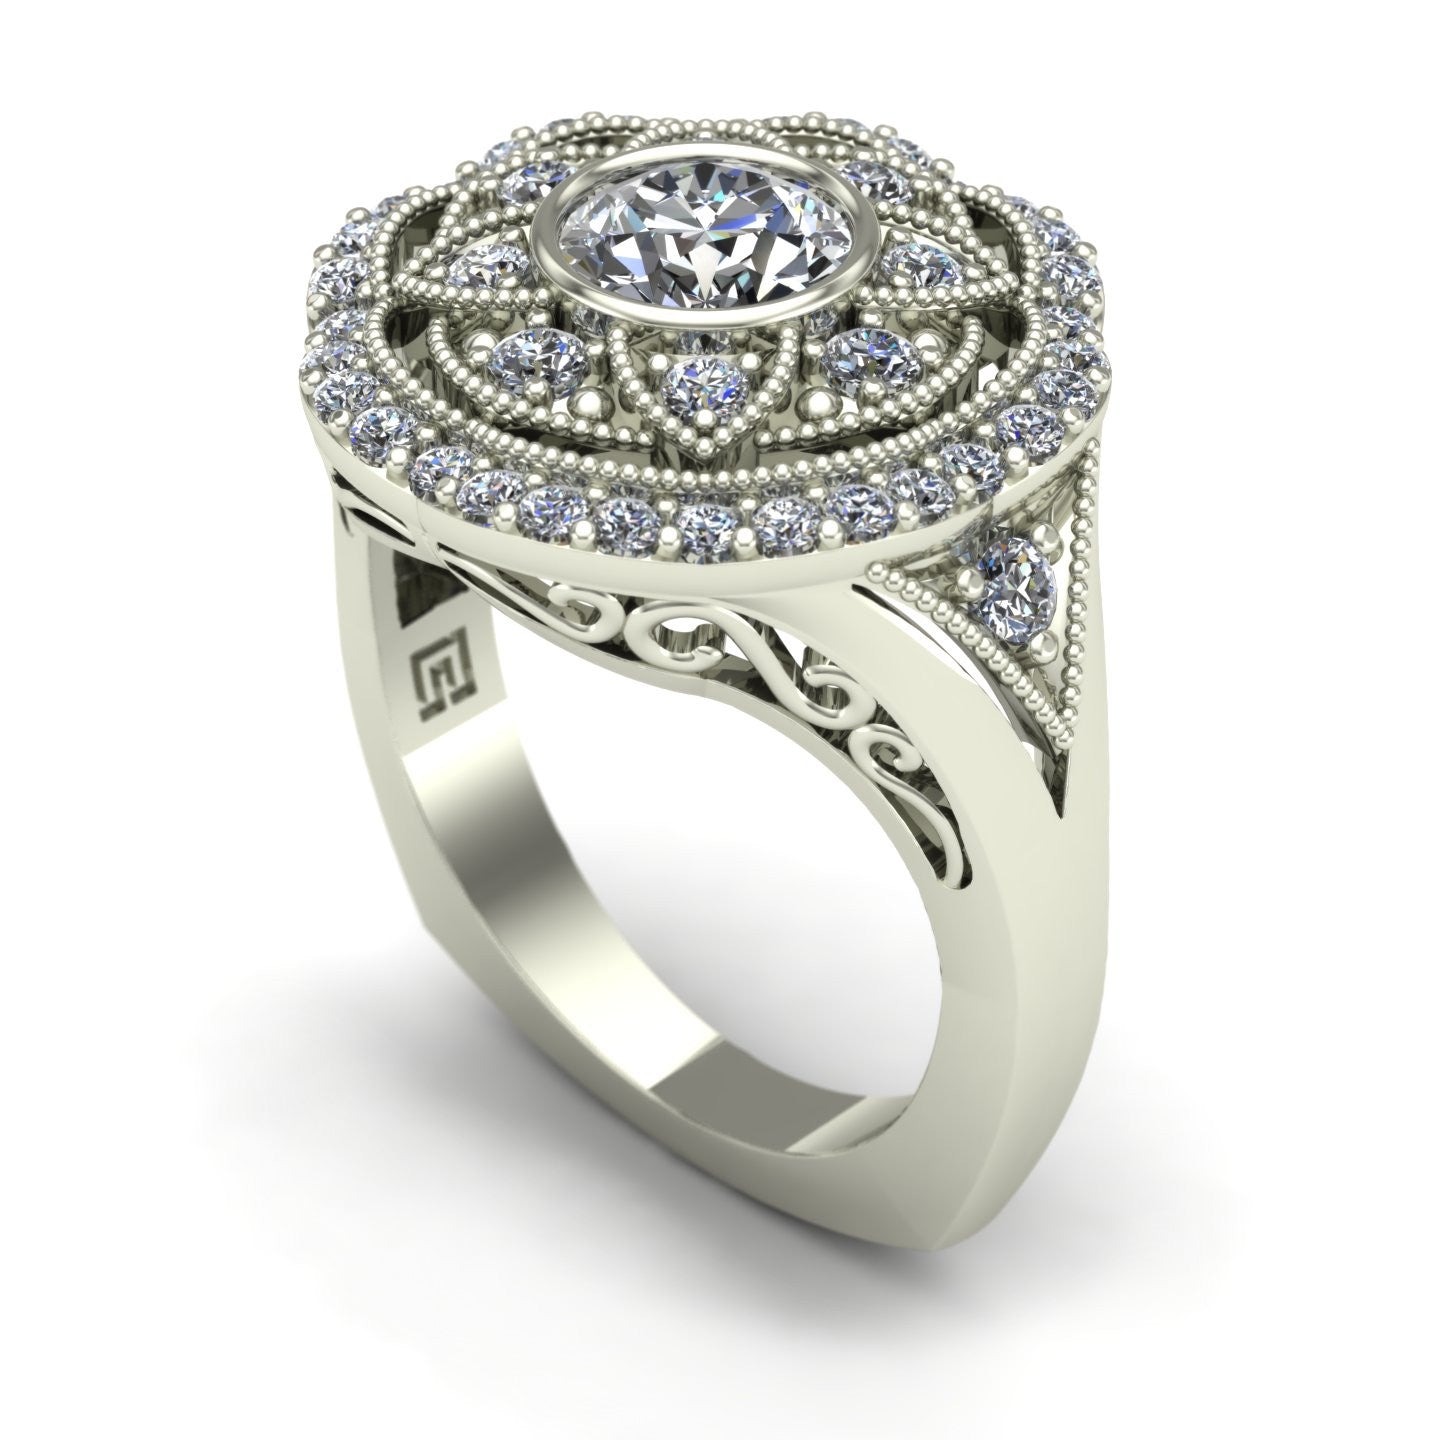 three quarter carat bezel set diamond right hand ring with a vintage look in 14k white gold - Charles Babb Designs